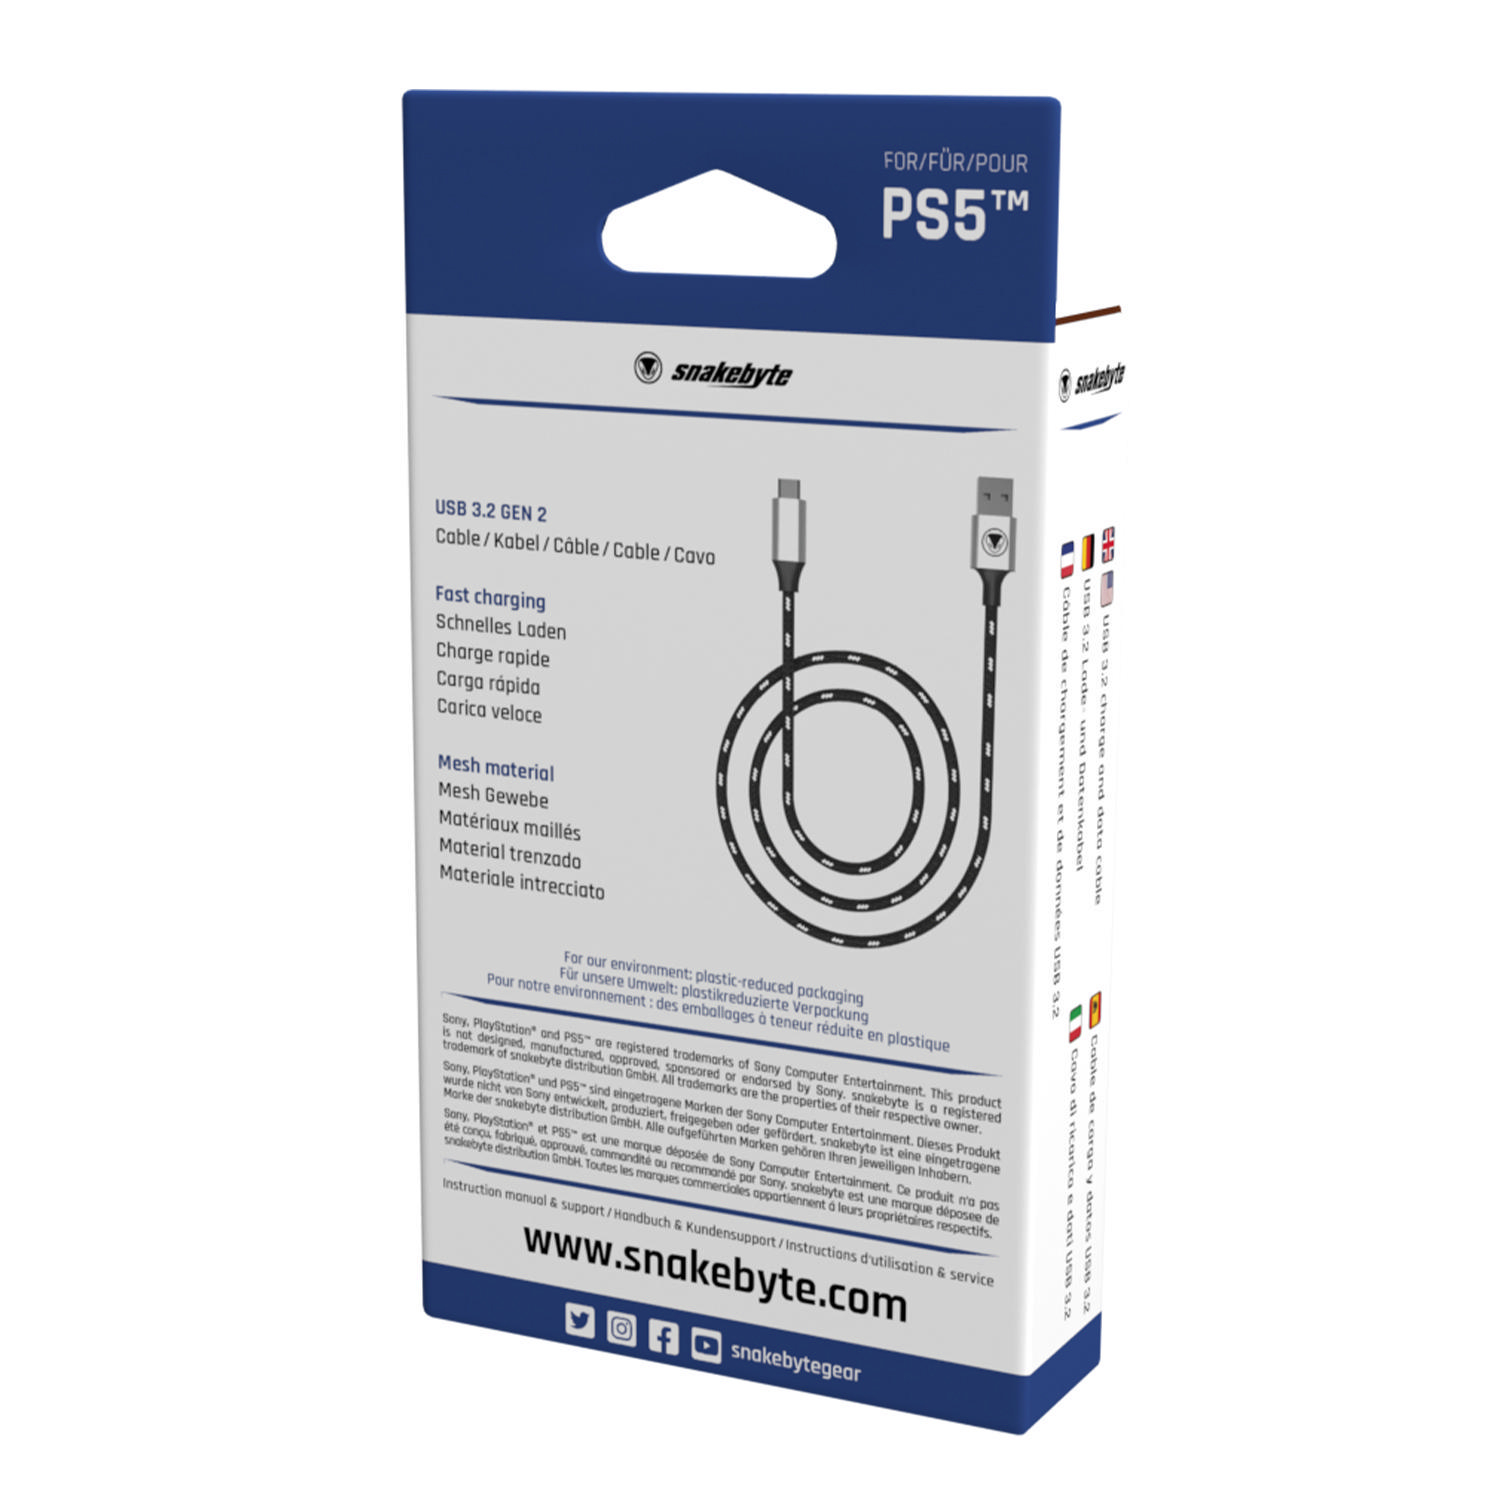 & PS5, SNAKEBYTE (2m) PS5 Data: Schwarz/Weiß 5 Charge USB CABLE Zubehör